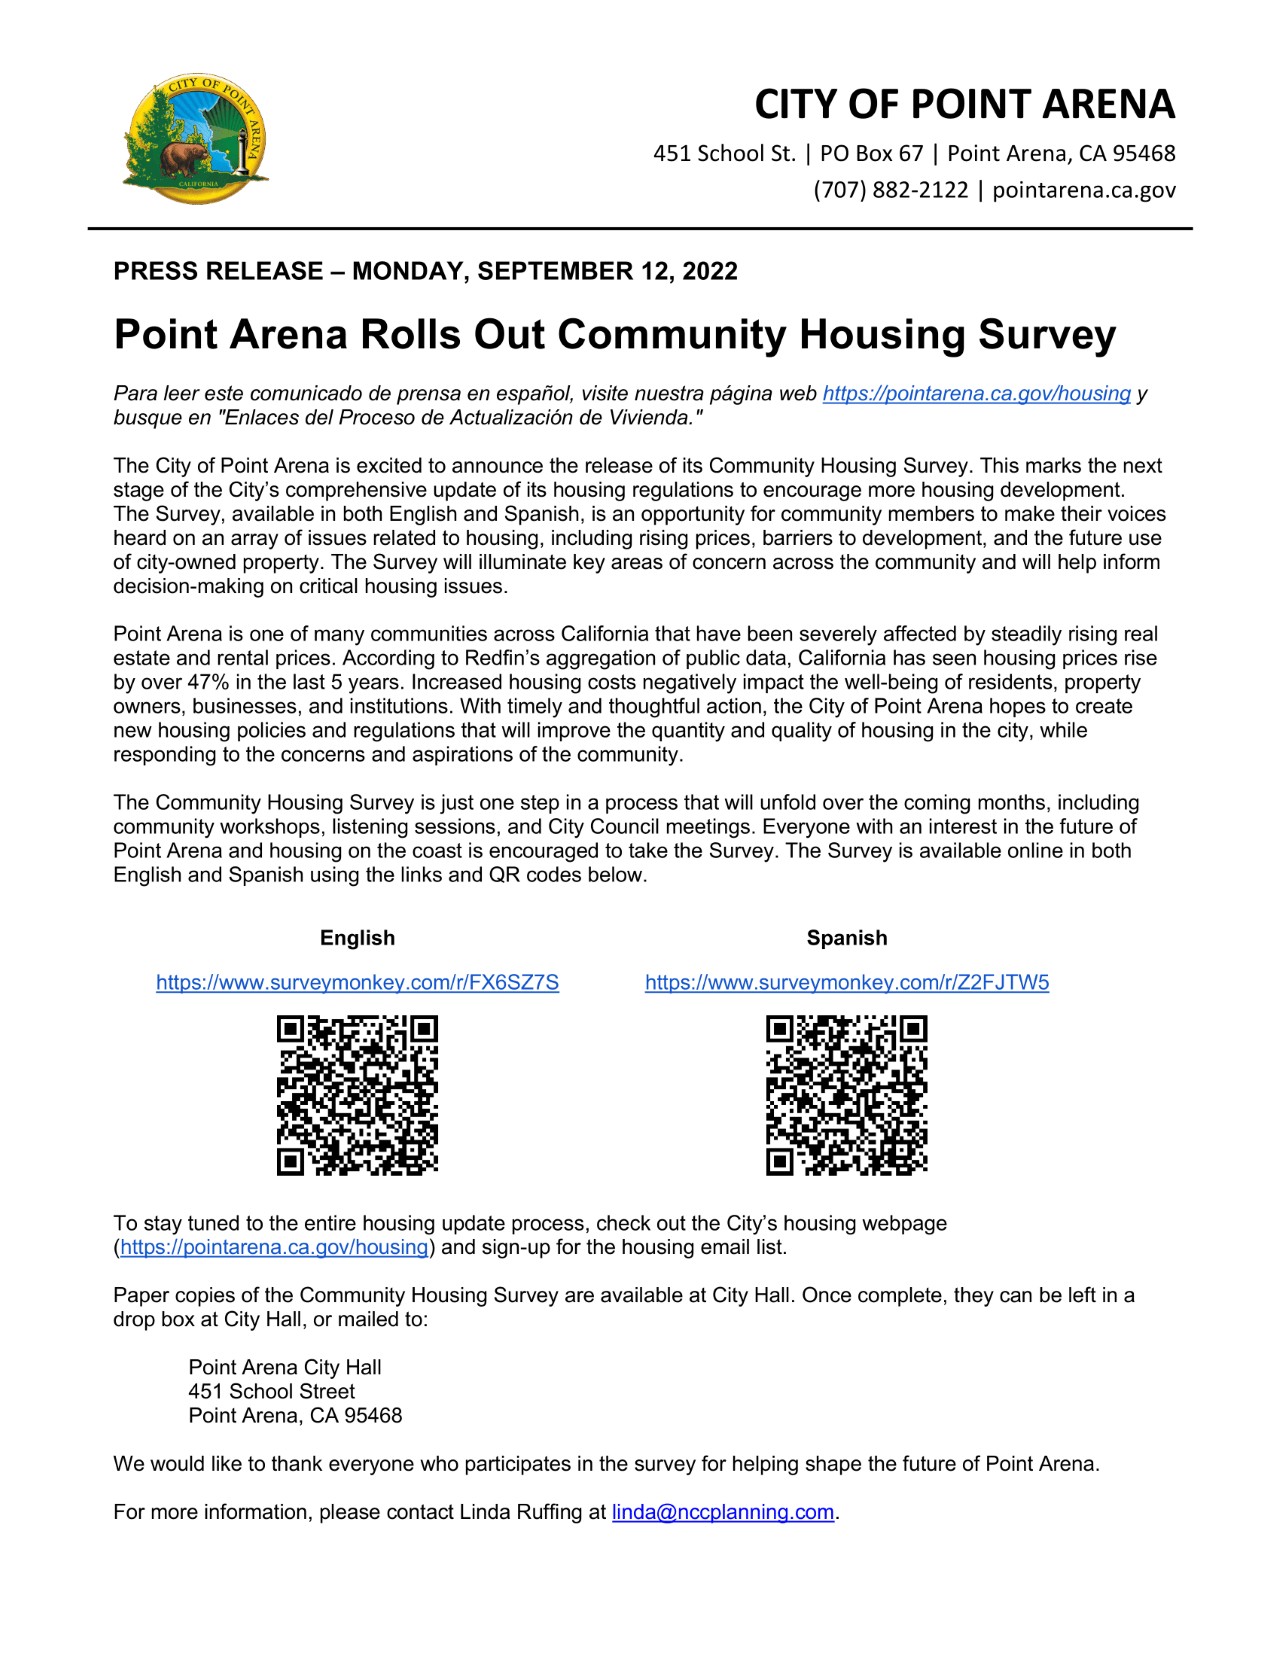 Press release from City of Point Arena regarding housing survey. QCR Codes included with survey monkey links.